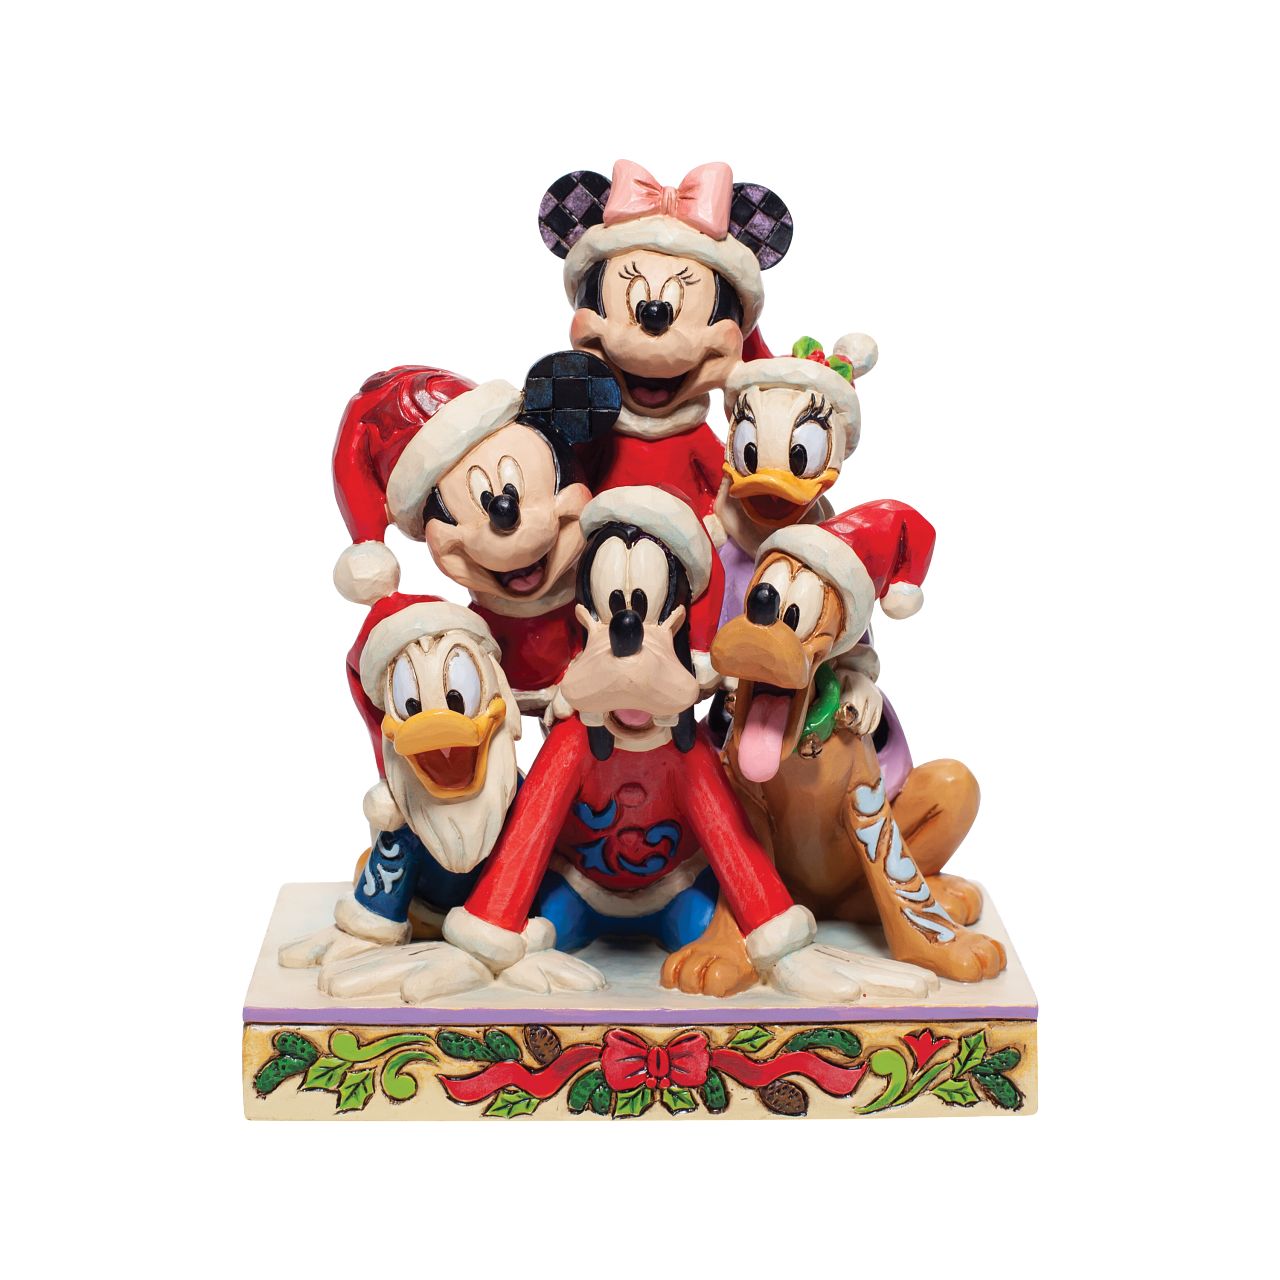 Jim Shore Christmas Mickey and Friends Stacked Figurine  Stacked in a holiday pyramid, Mickey and pals savour a day in the snow. Each wearing a Santa hat, they've discovered the meaning of Christmas and enjoy jolly laughs surrounded by friends. Jim Shore creates a scene sandwiched with nostalgia and love.